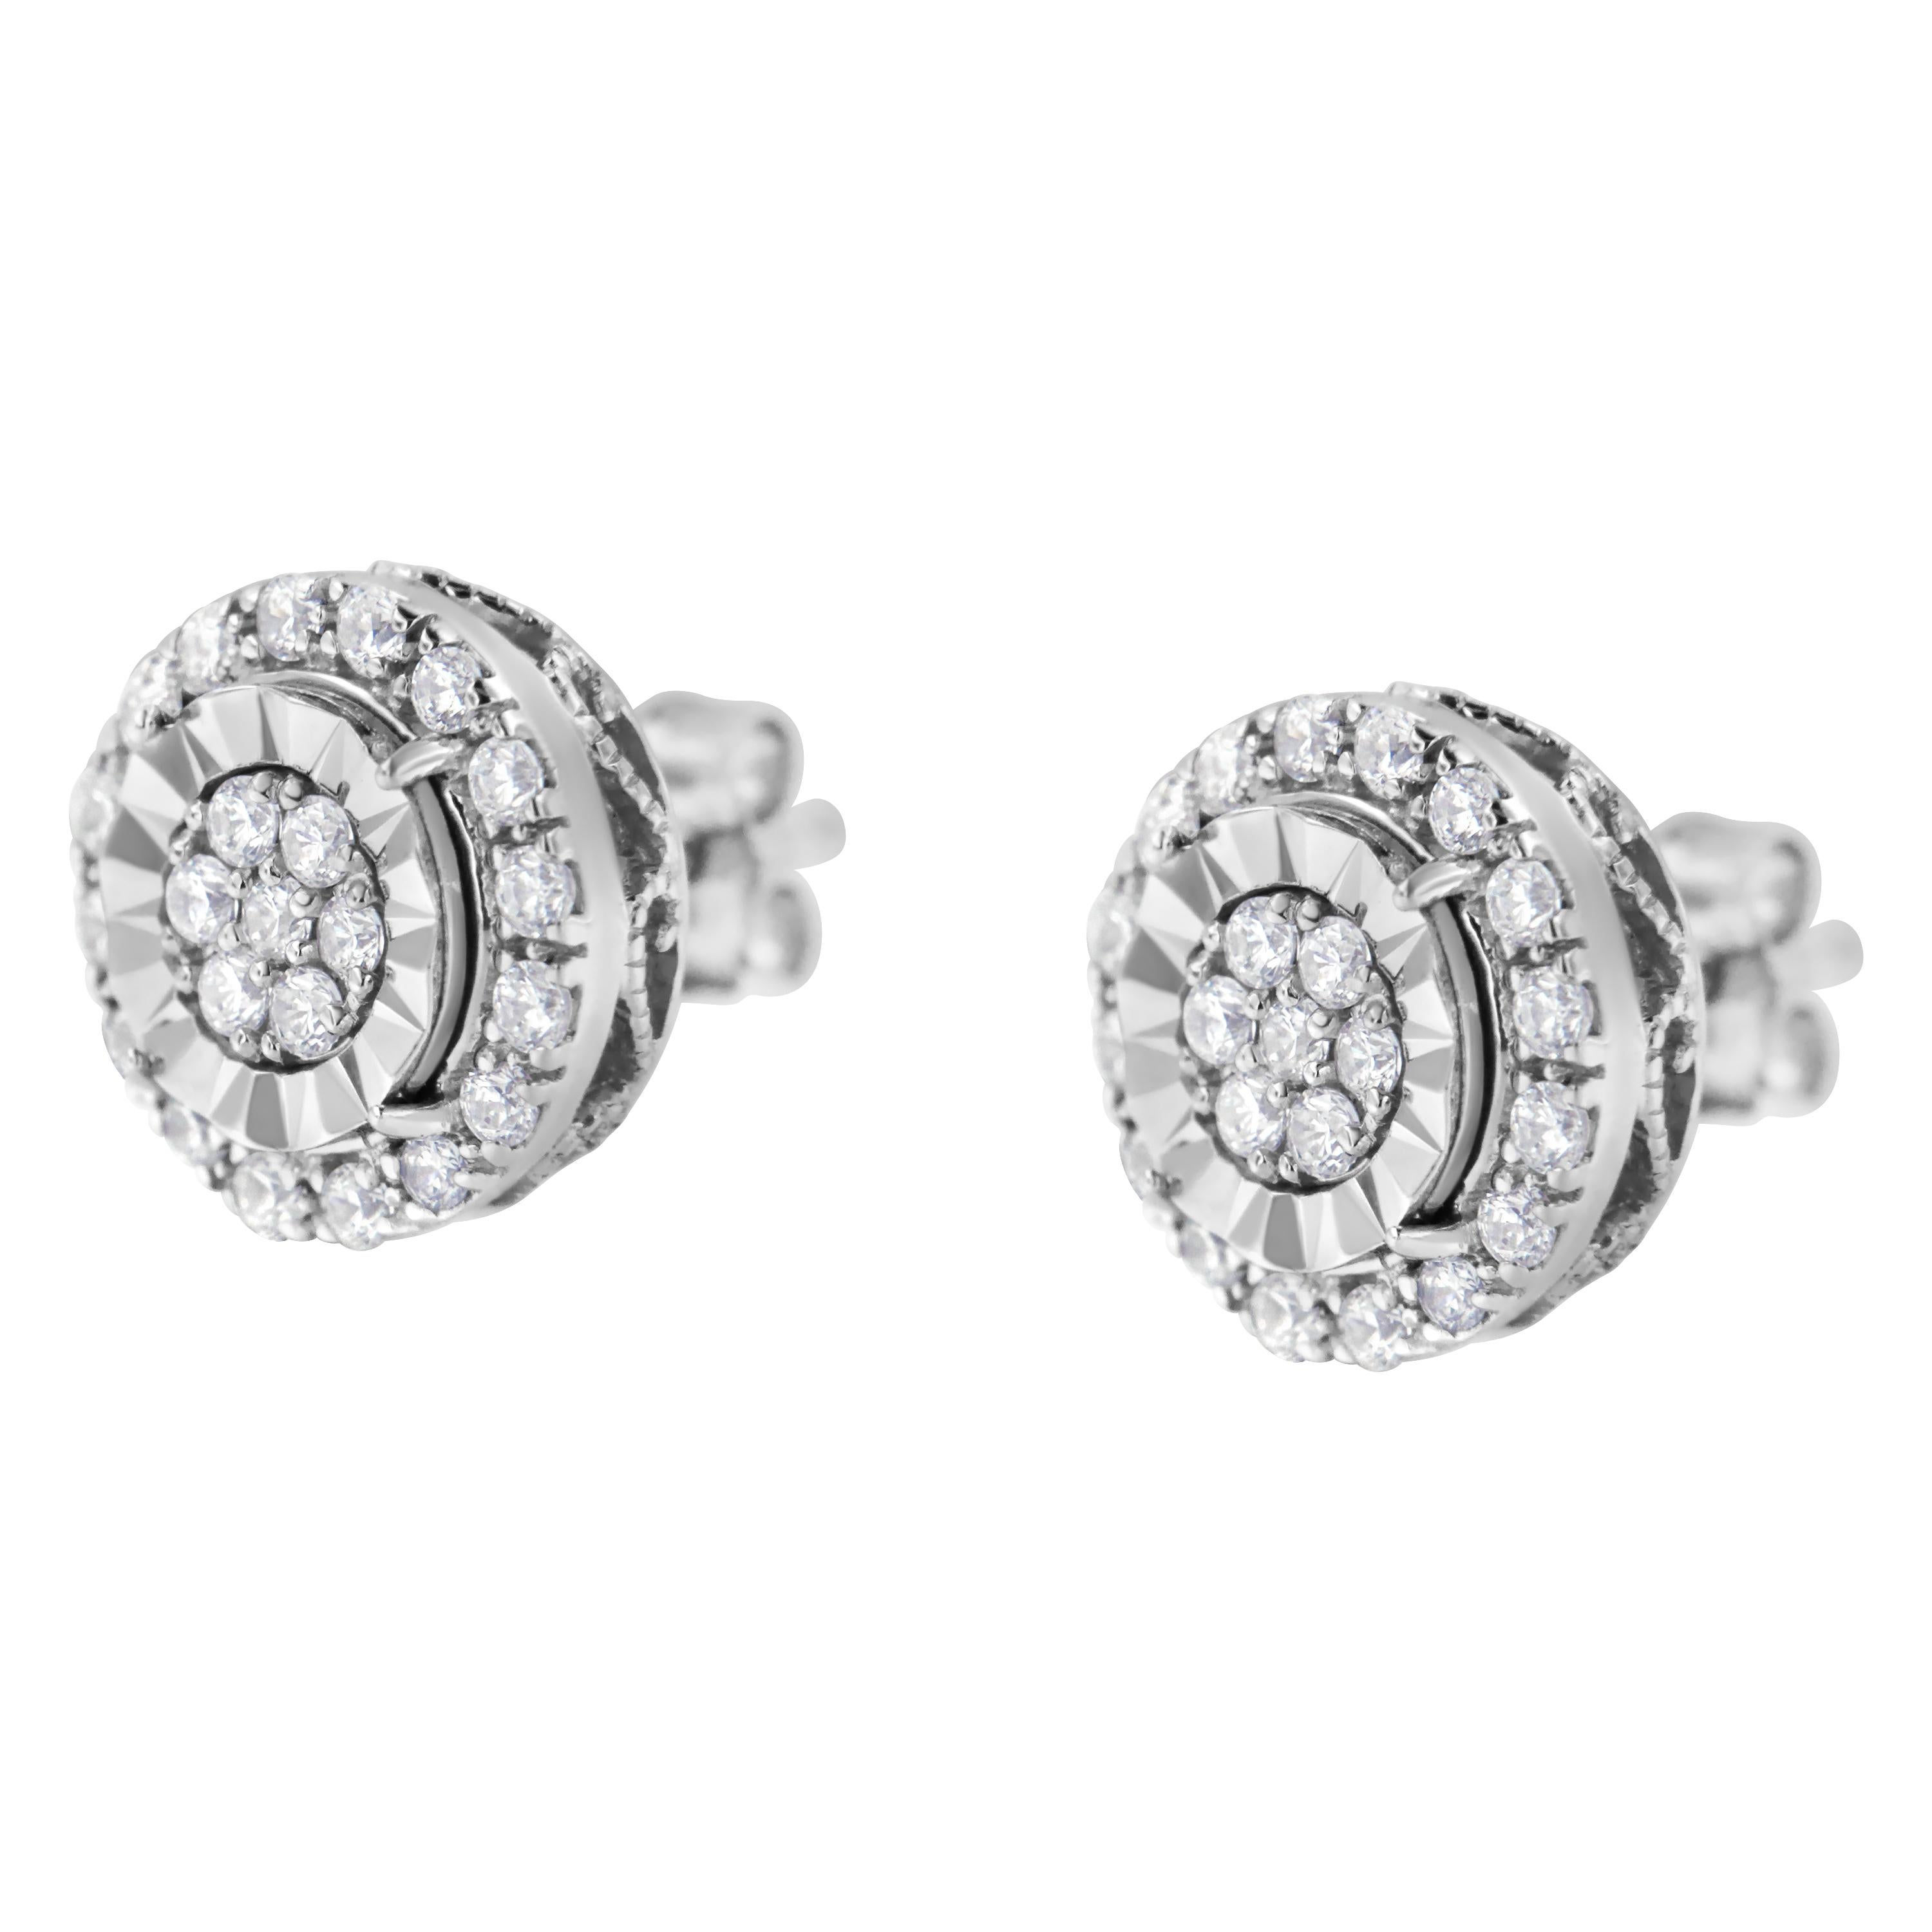 Contemporary .925 Sterling Silver 1.0 Carat Diamond Cluster Earrings For Sale